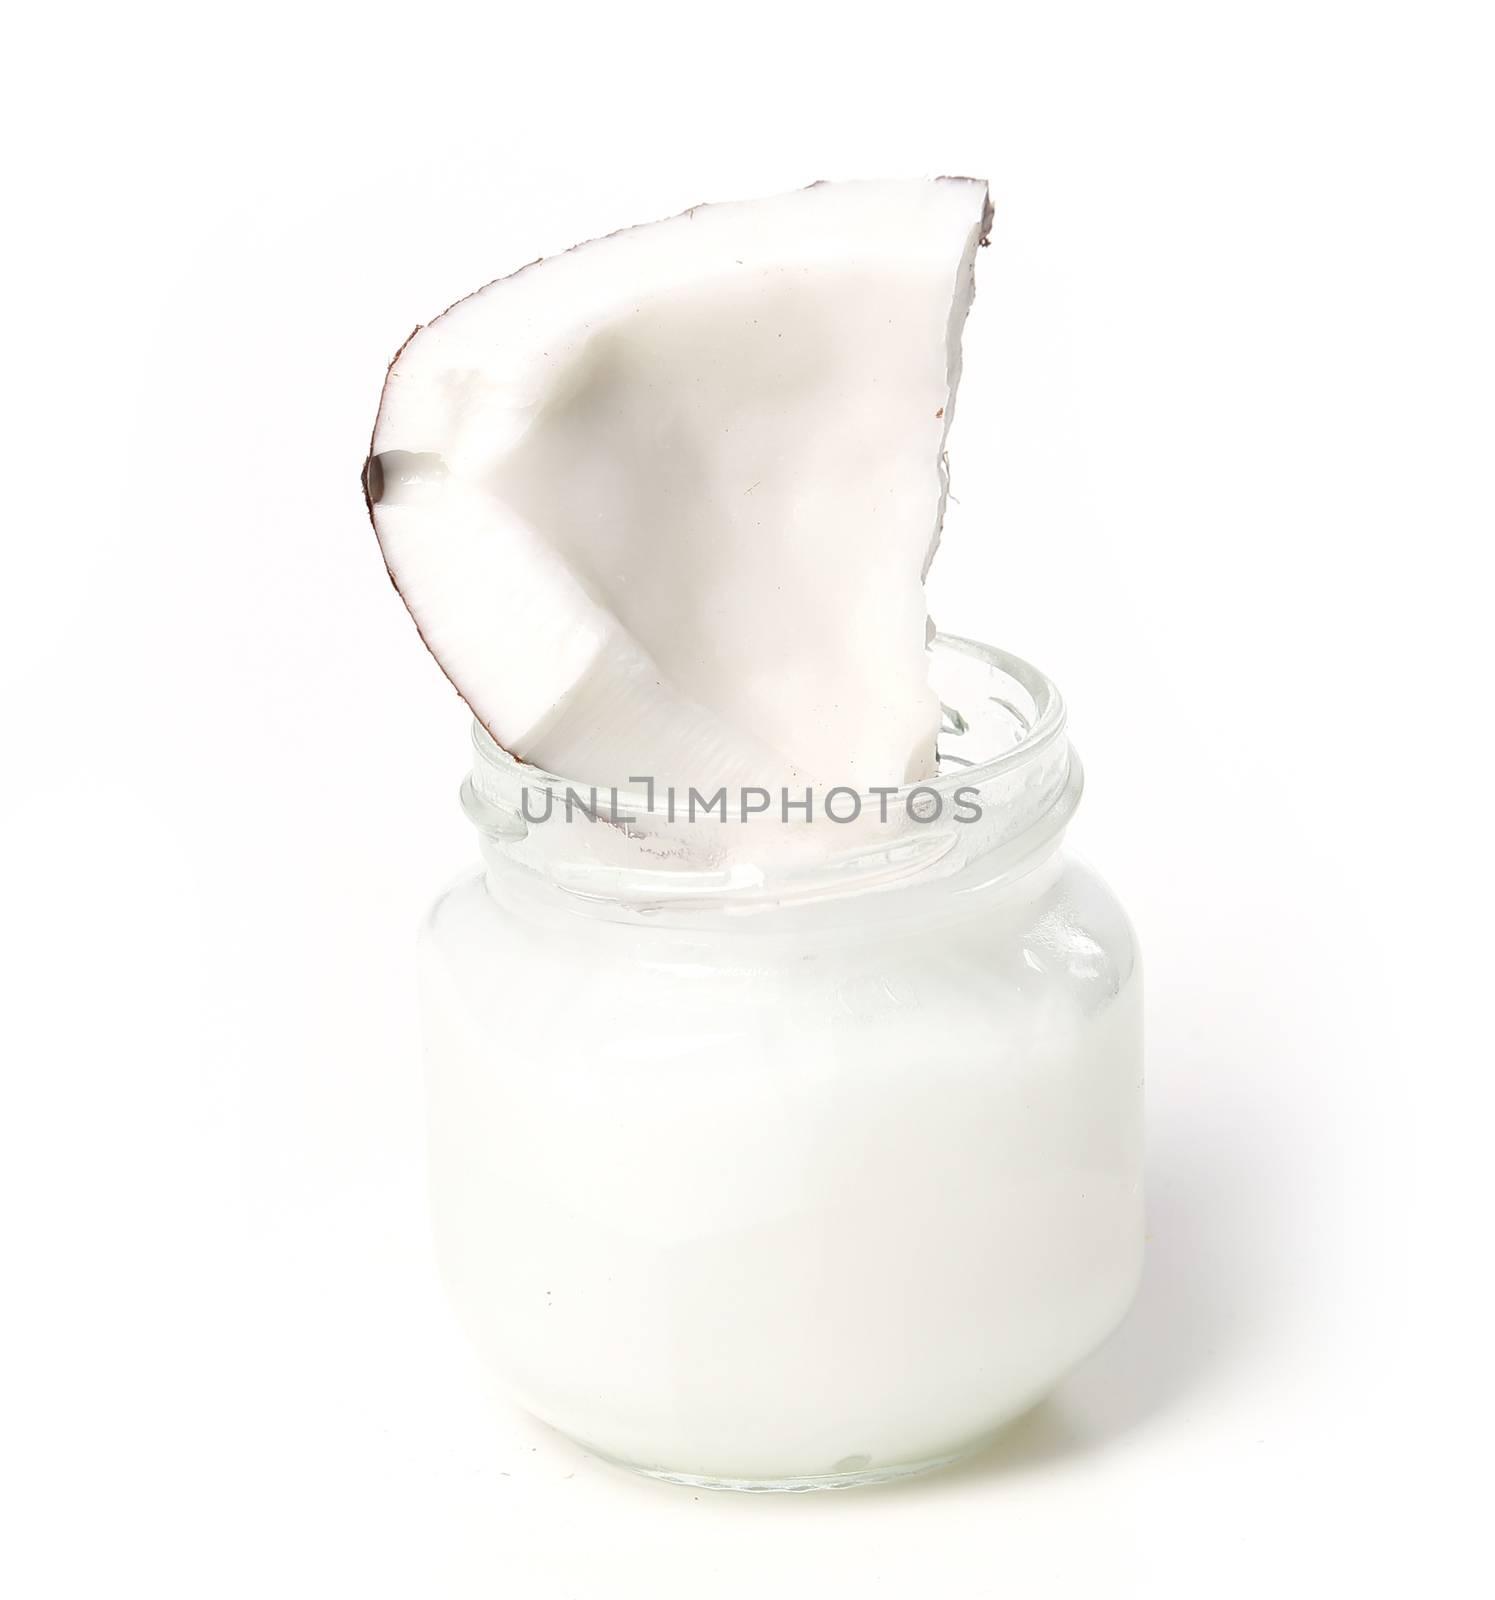 Coconut on a white background